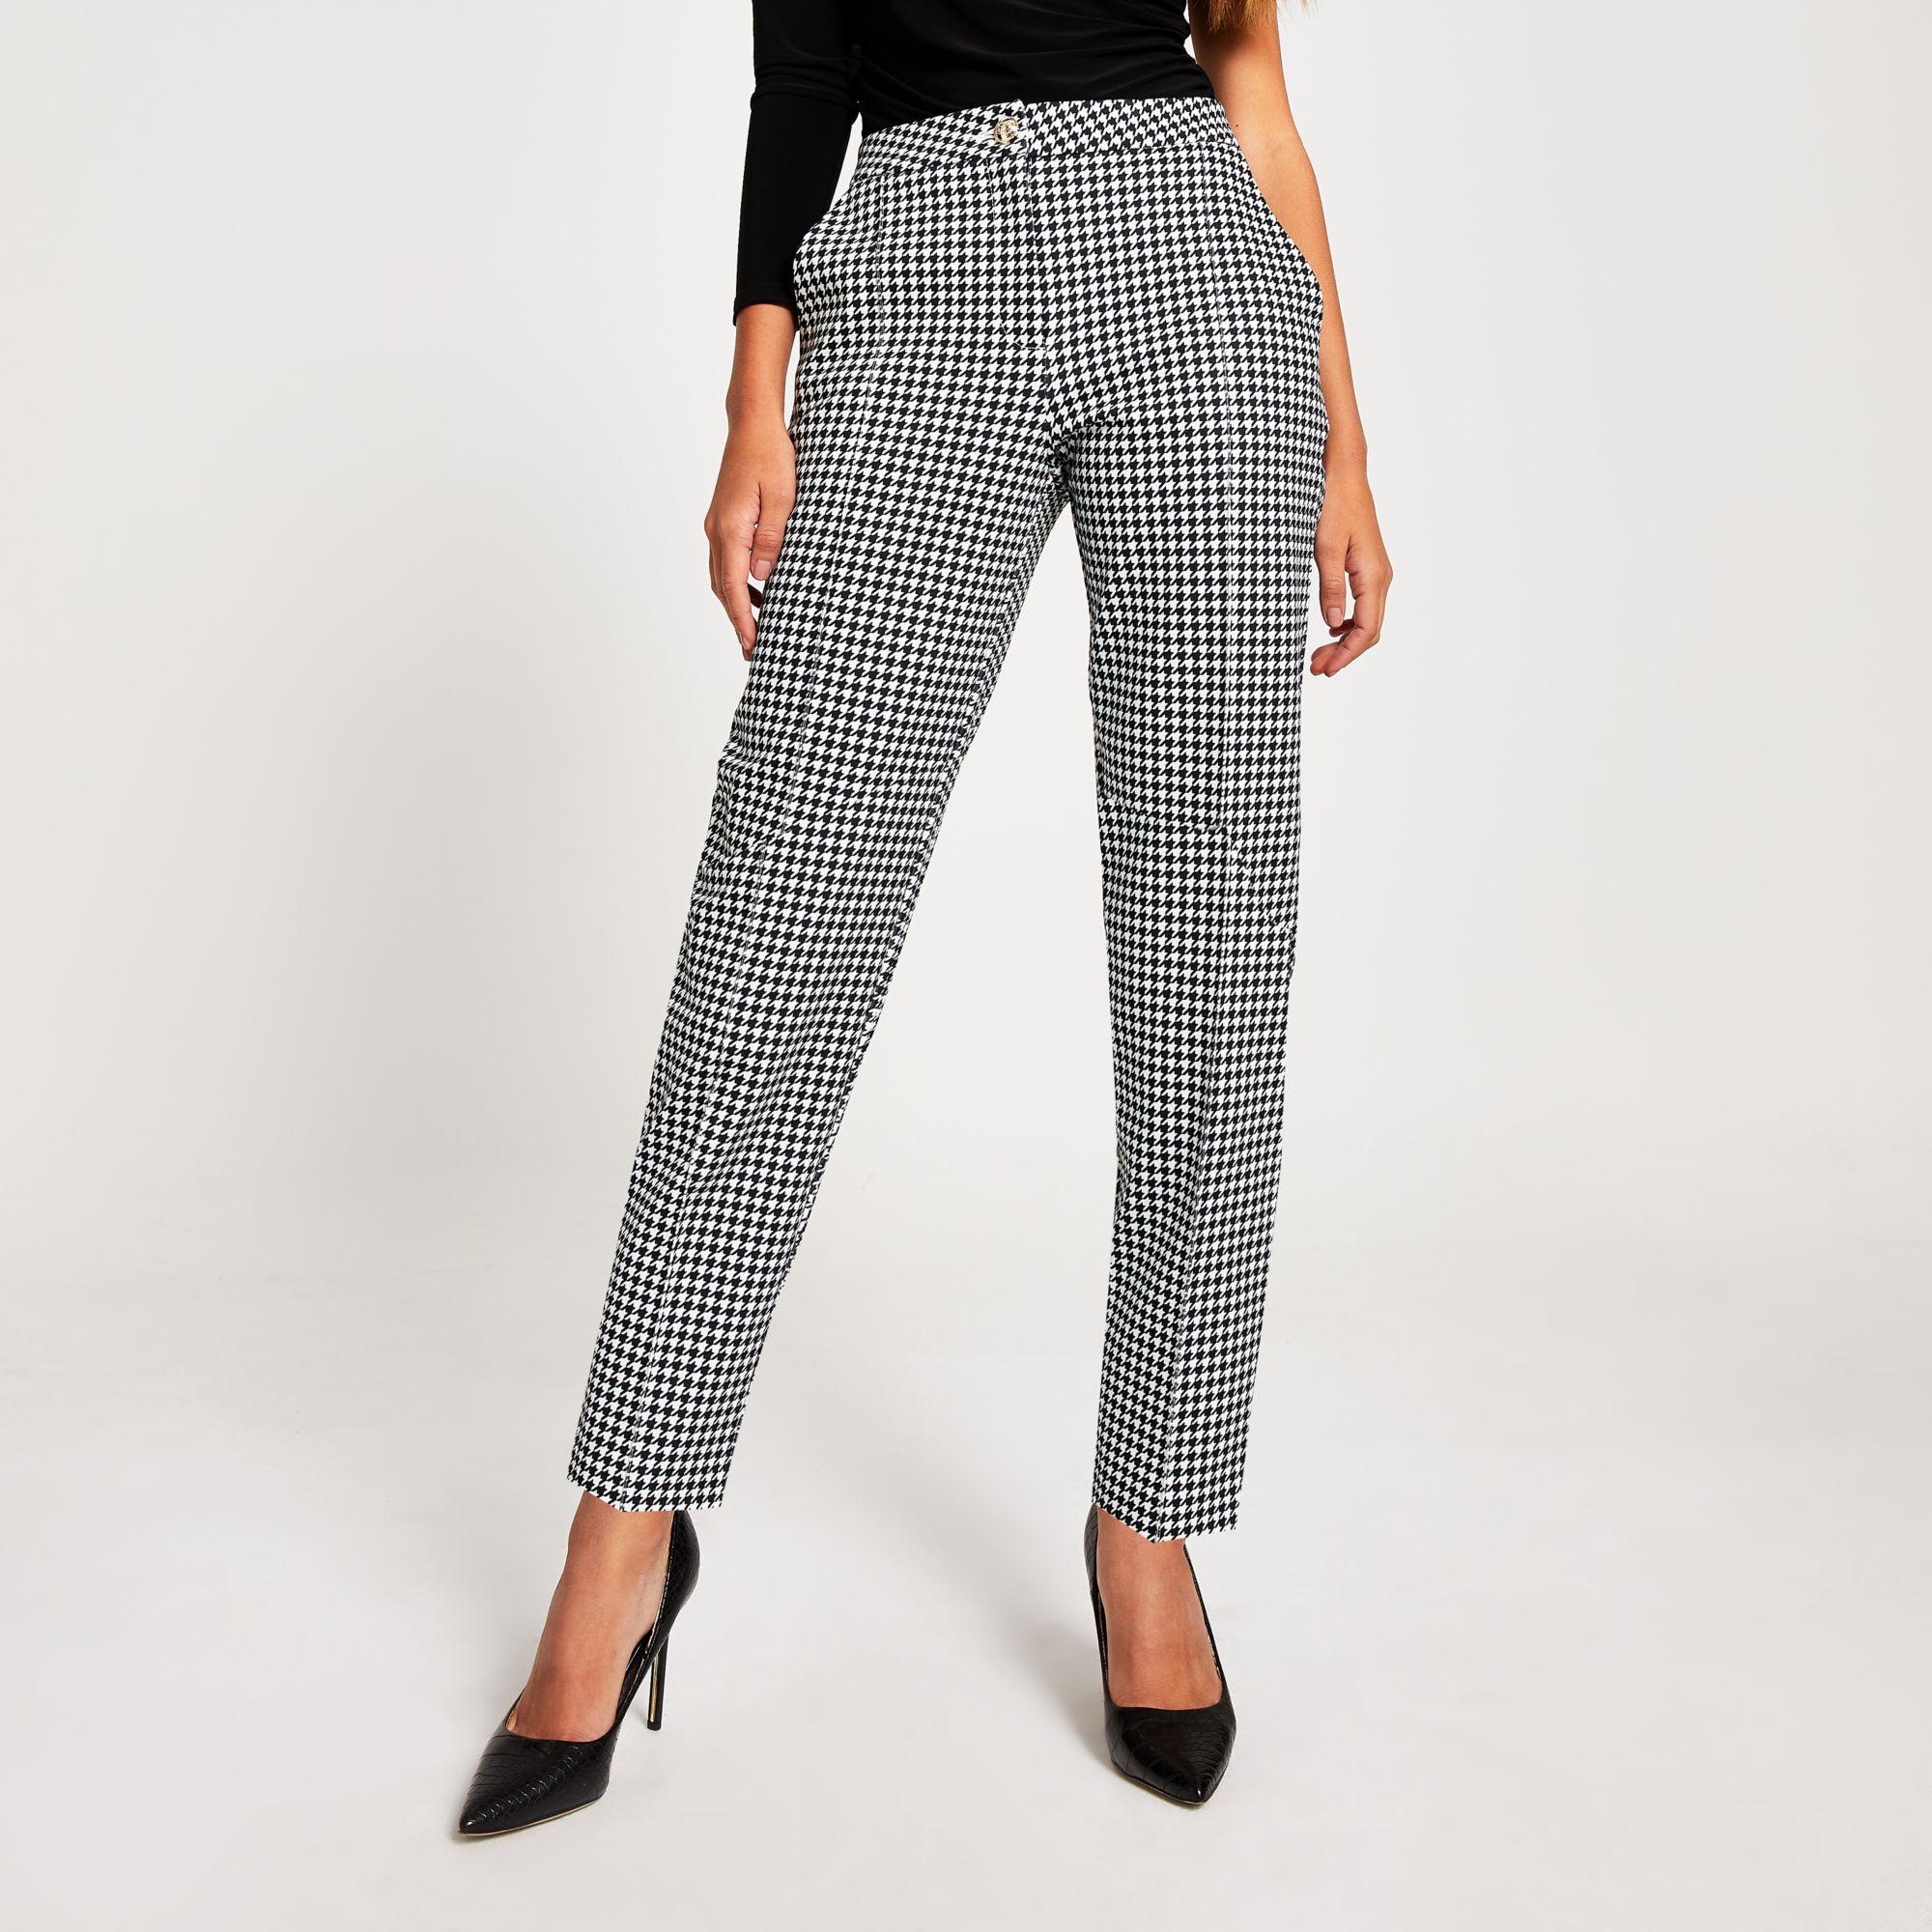 River Island Dogtooth Ponte Cigarette Trousers in Black - Lyst